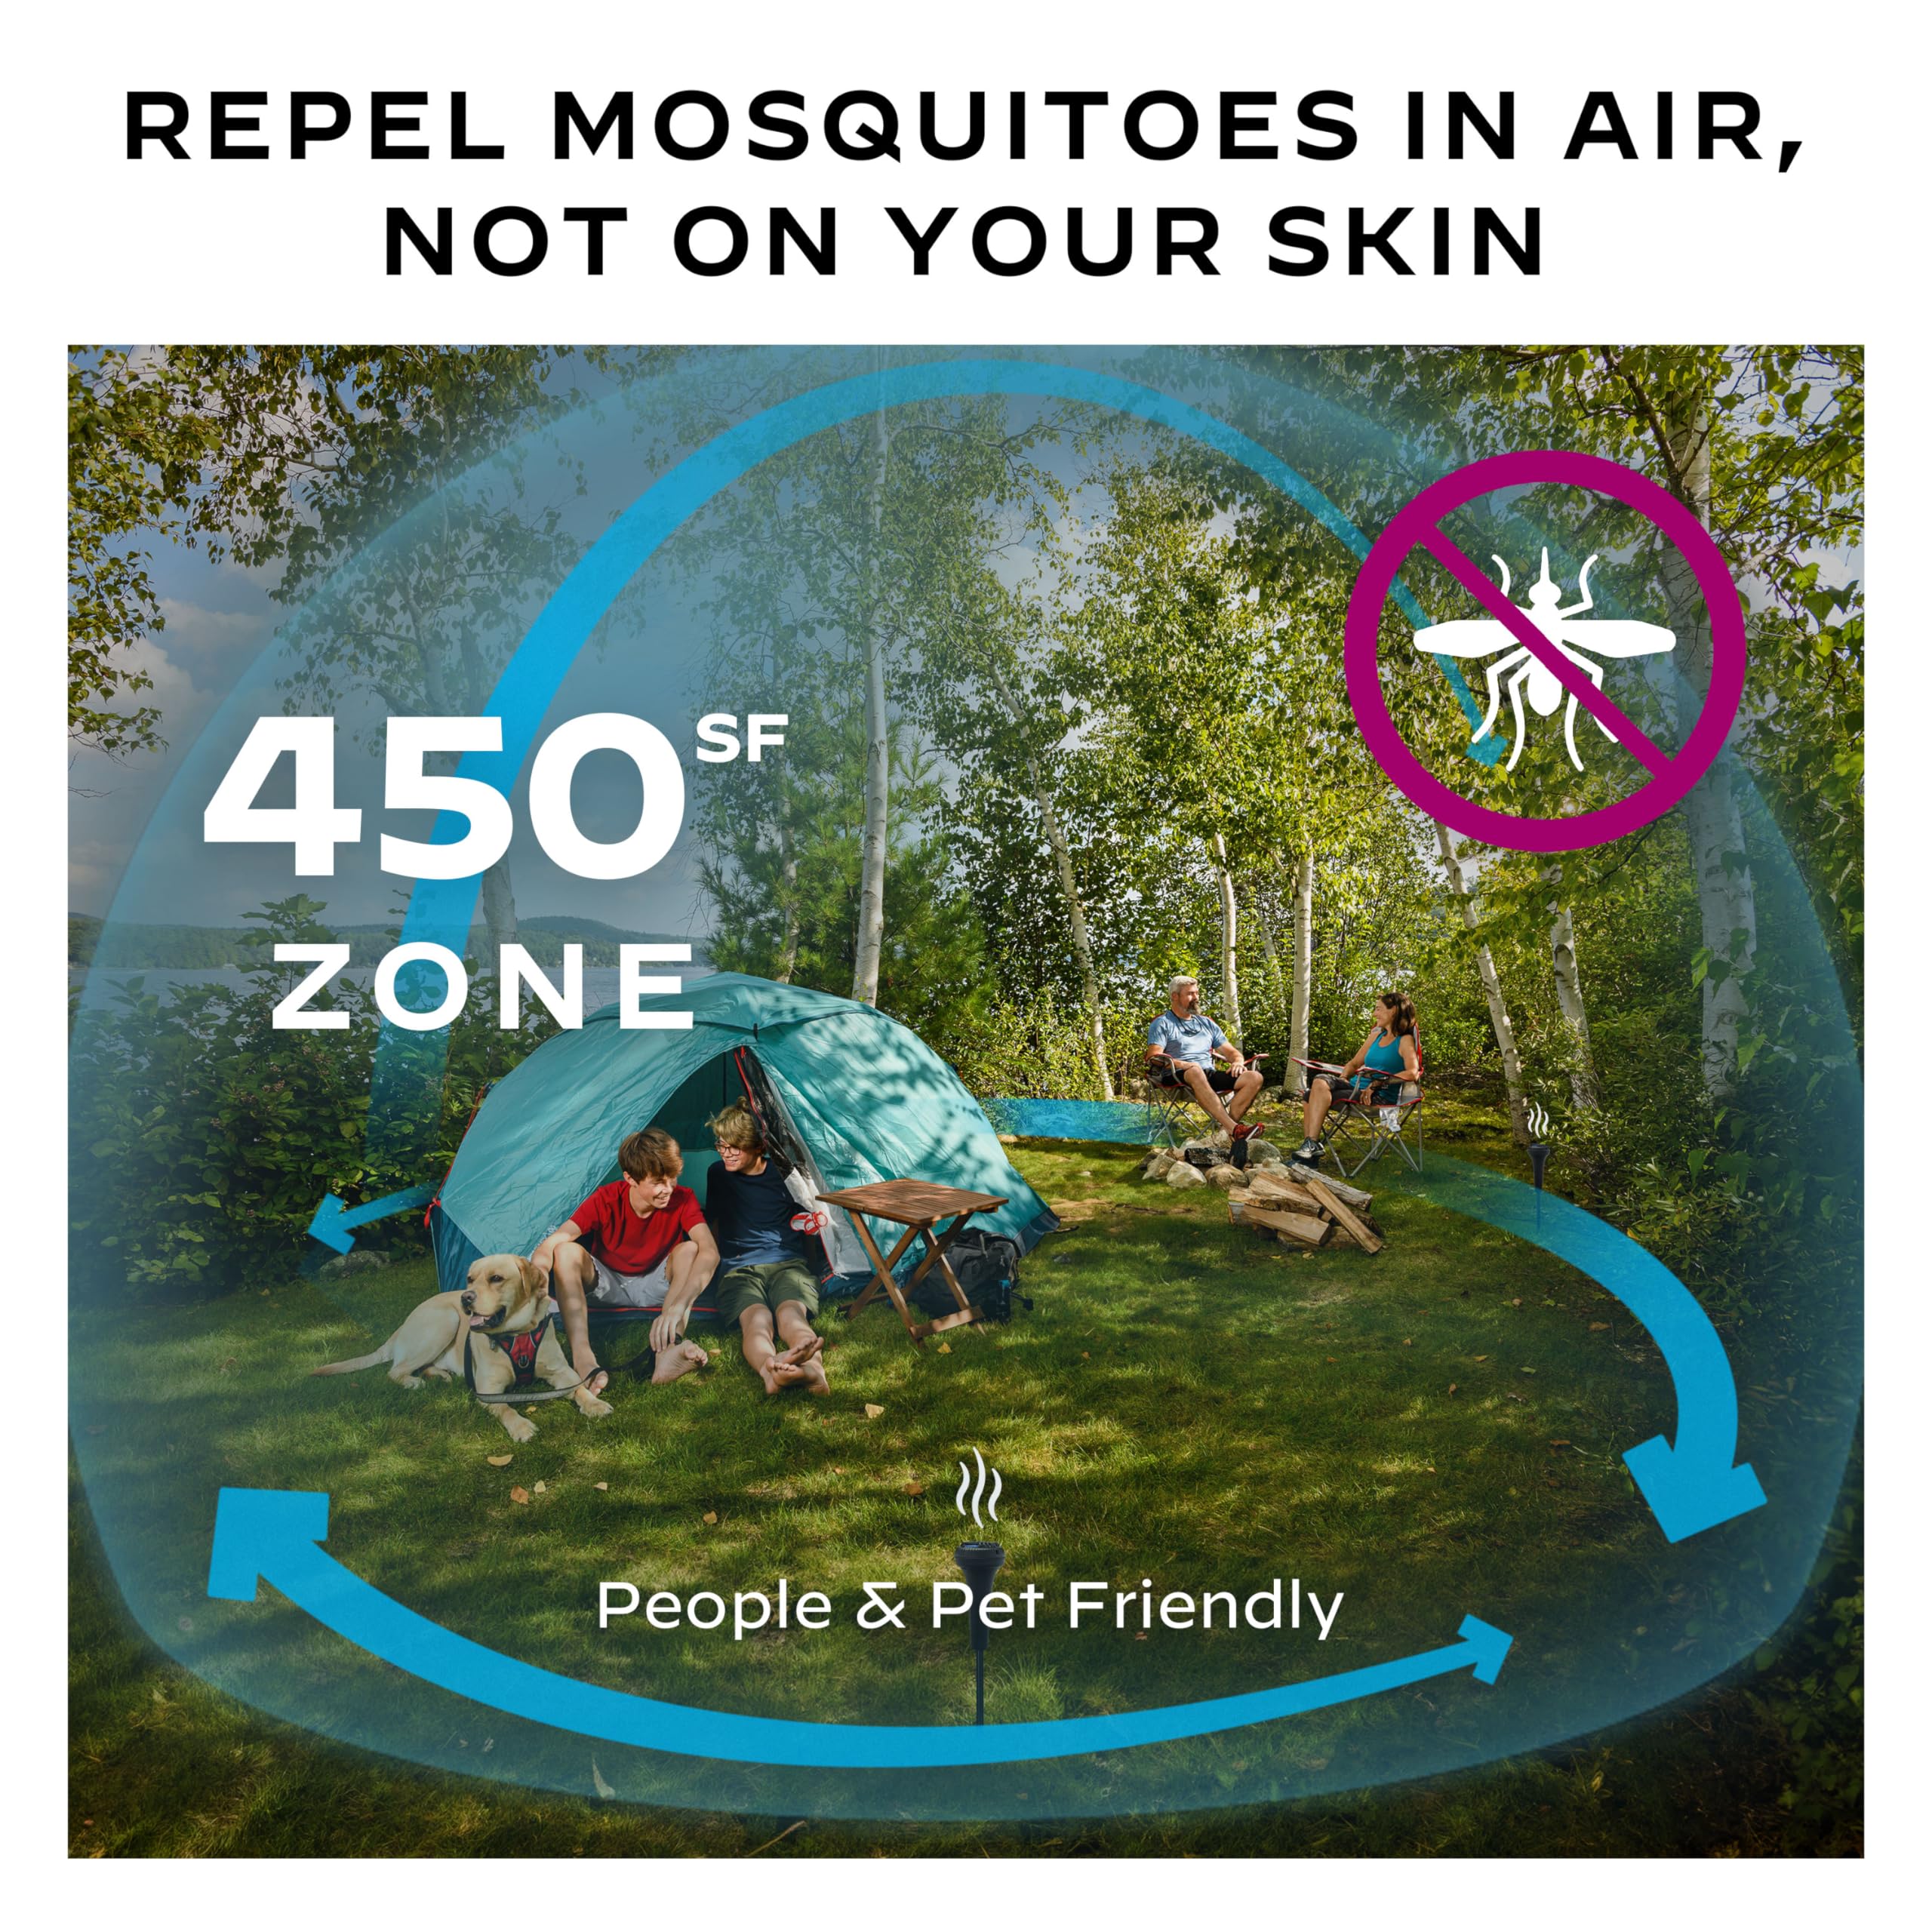 Thermacell Mosquito Repellent Perimeter System; Includes 12-Hour Refill; 15 Foot Zone of Mosquito Protection; Effective Mosquito Repellent for Patio; Bug Spray Alternative; Scent Free